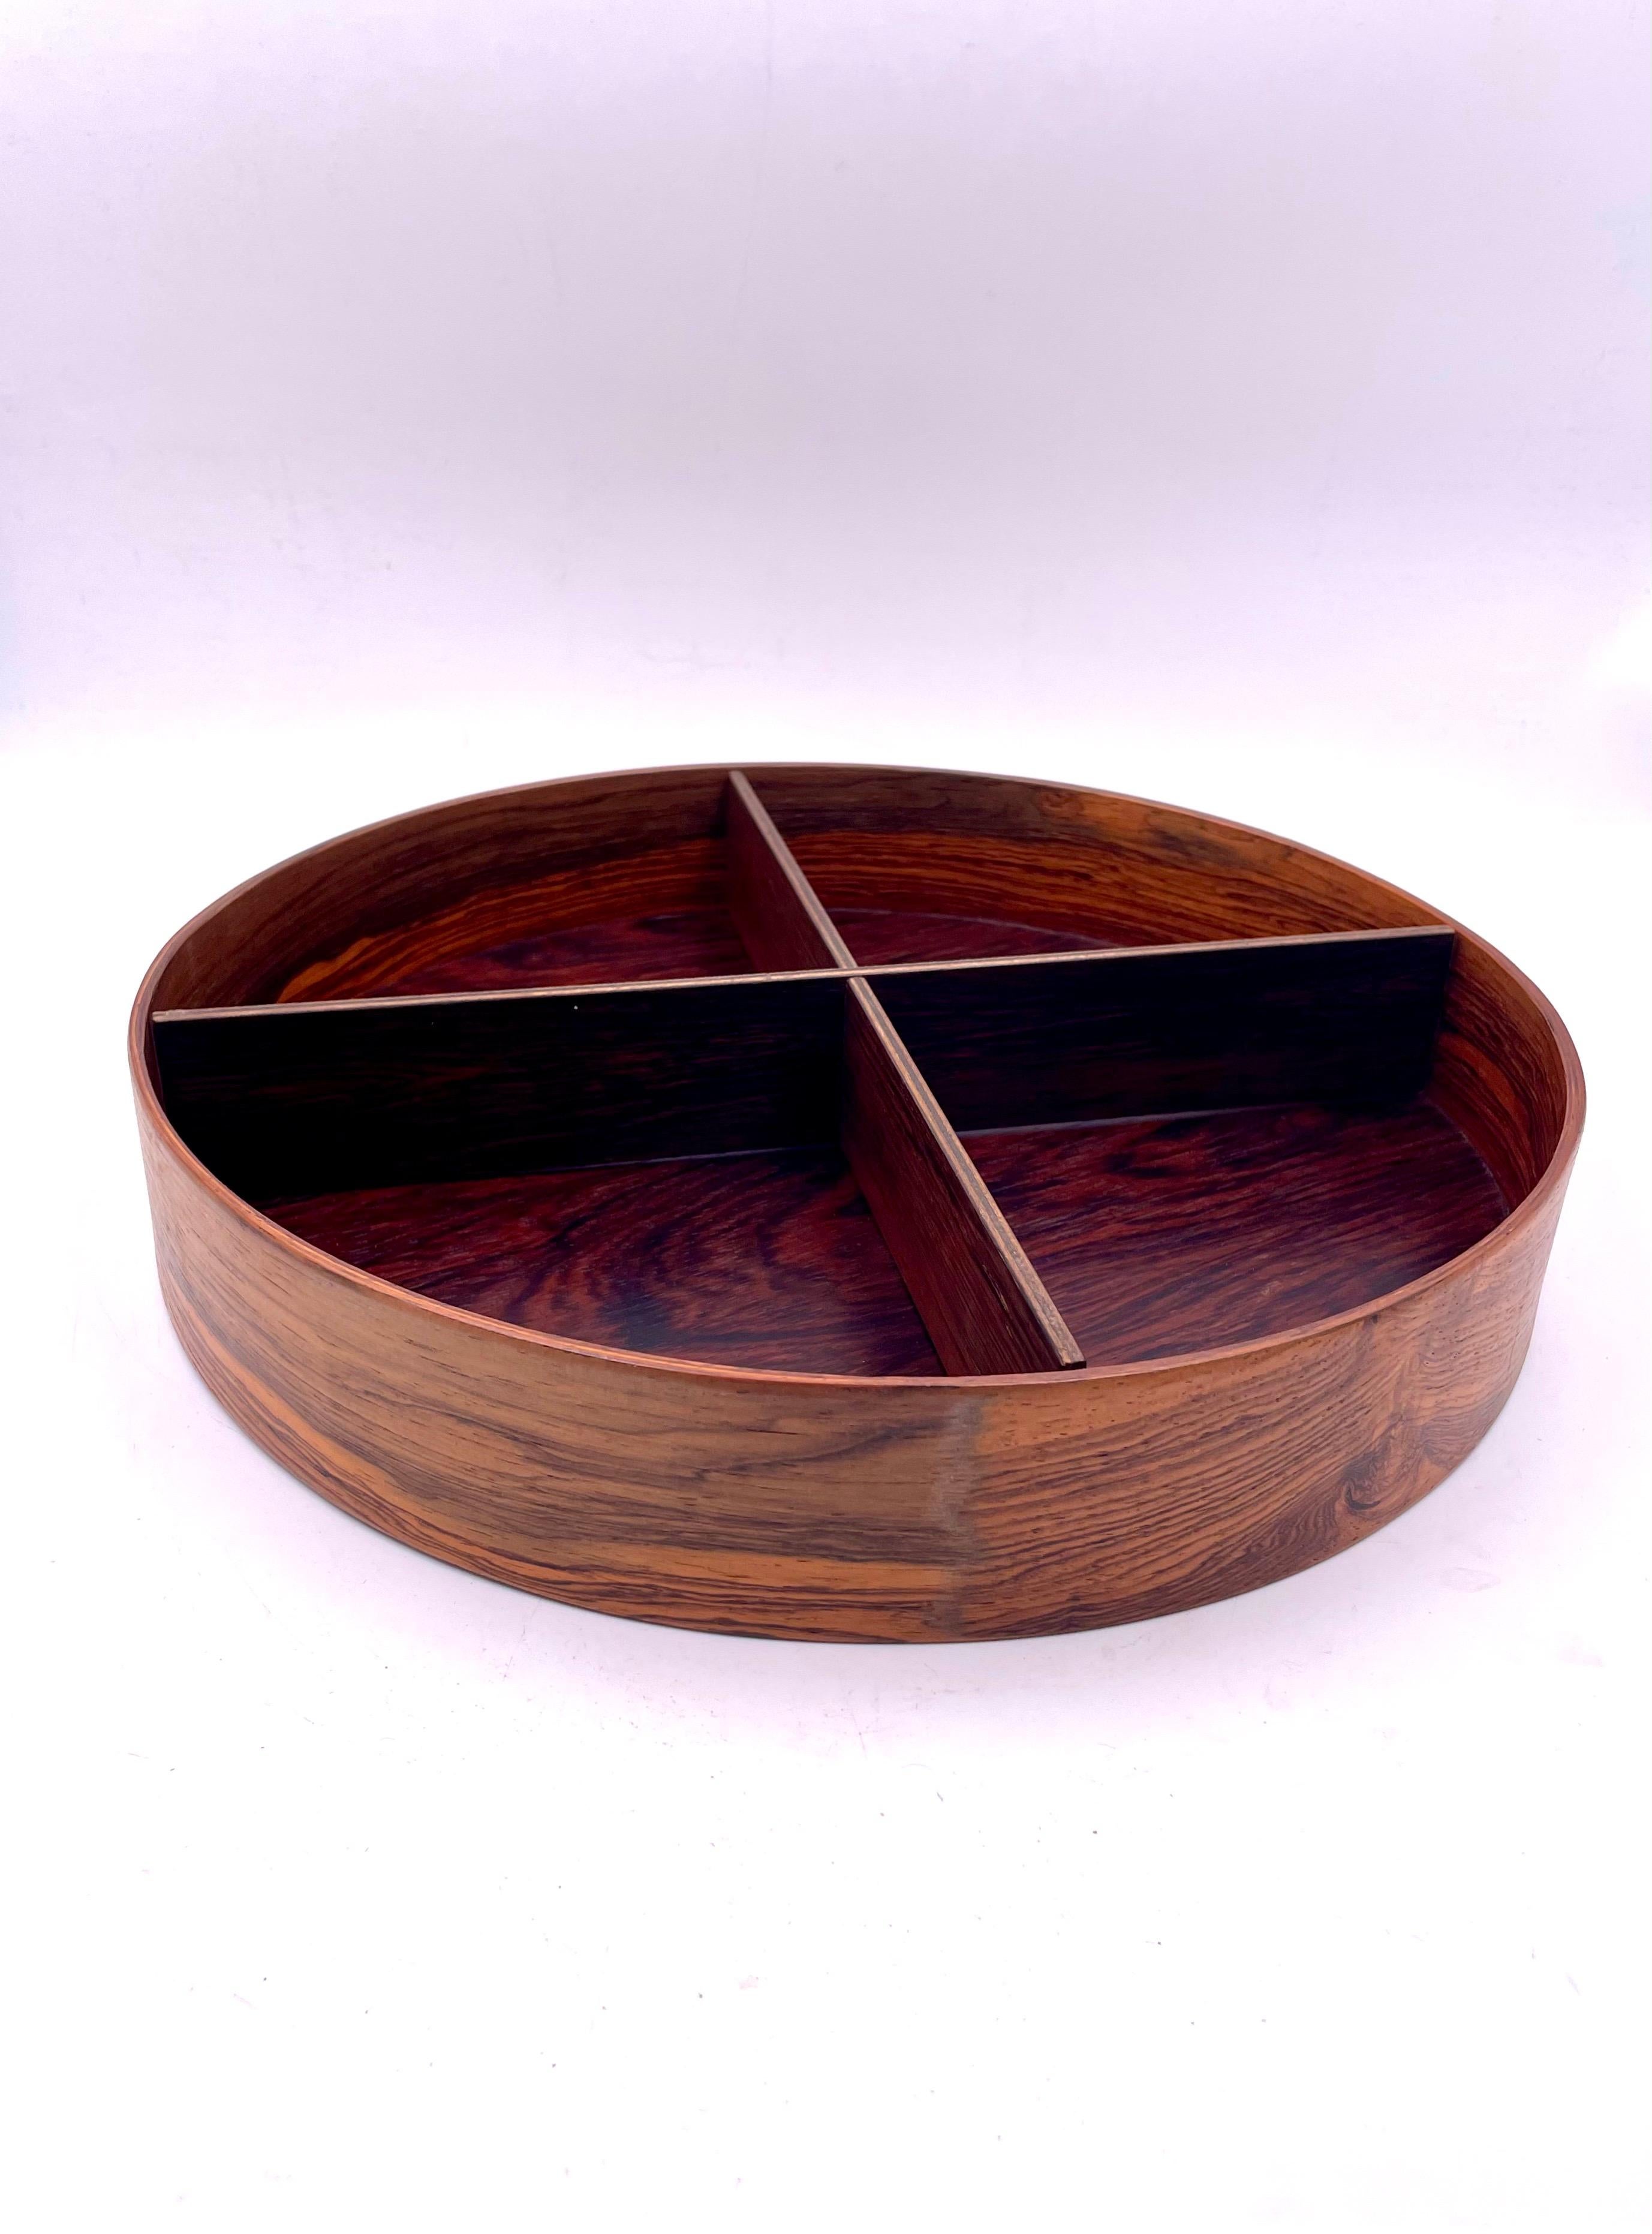 Beautiful round serving tray with removable dividers, circa 1960's elegant and functional.